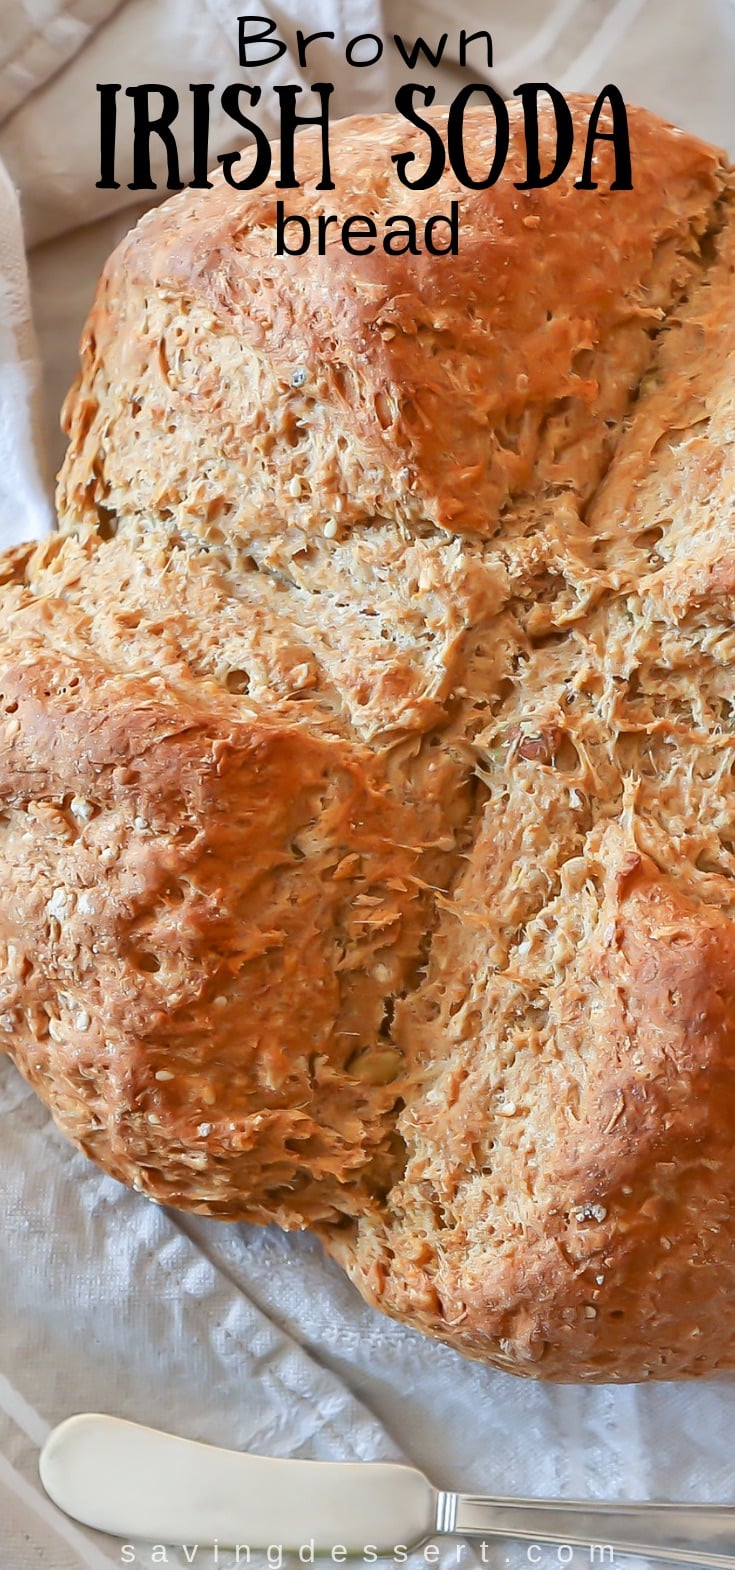 Fresh baked Brown Irish Soda Bread with an amazing crust, a nutty, fluffy, soft crumb and a flavor that is often found with harder-to-make yeast breads. #irishsodabread #brownirishsodabread #brownbread #sodabread #irishrecipe #irishbread #easybread